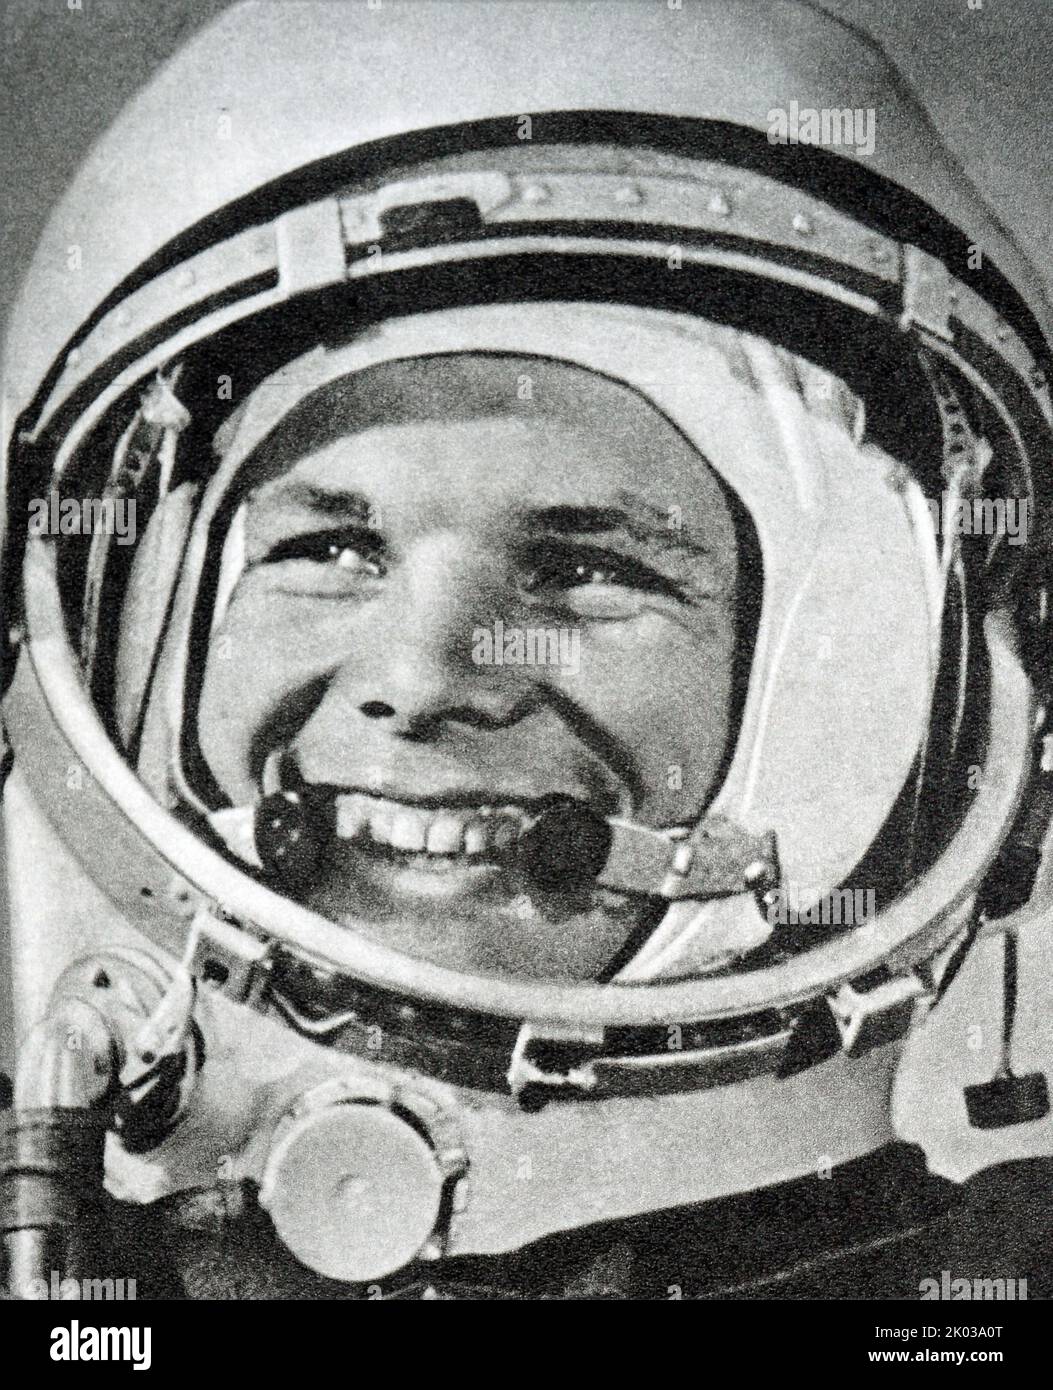 Yuri Alekseevich Gagarin (1934 - 1968) cosmonaut of the USSR. On April 12, 1961, Yuri Gagarin became the first person in world history to fly into outer space. The Vostok launch vehicle with the Vostok-1 spacecraft carrying Gagarin was launched from the Baikonur cosmodrome located in the Kyzyl-Orda region of Kazakhstan. After 108 minutes of flight, Gagarin successfully landed in the Saratov region, not far from Engels. Stock Photo